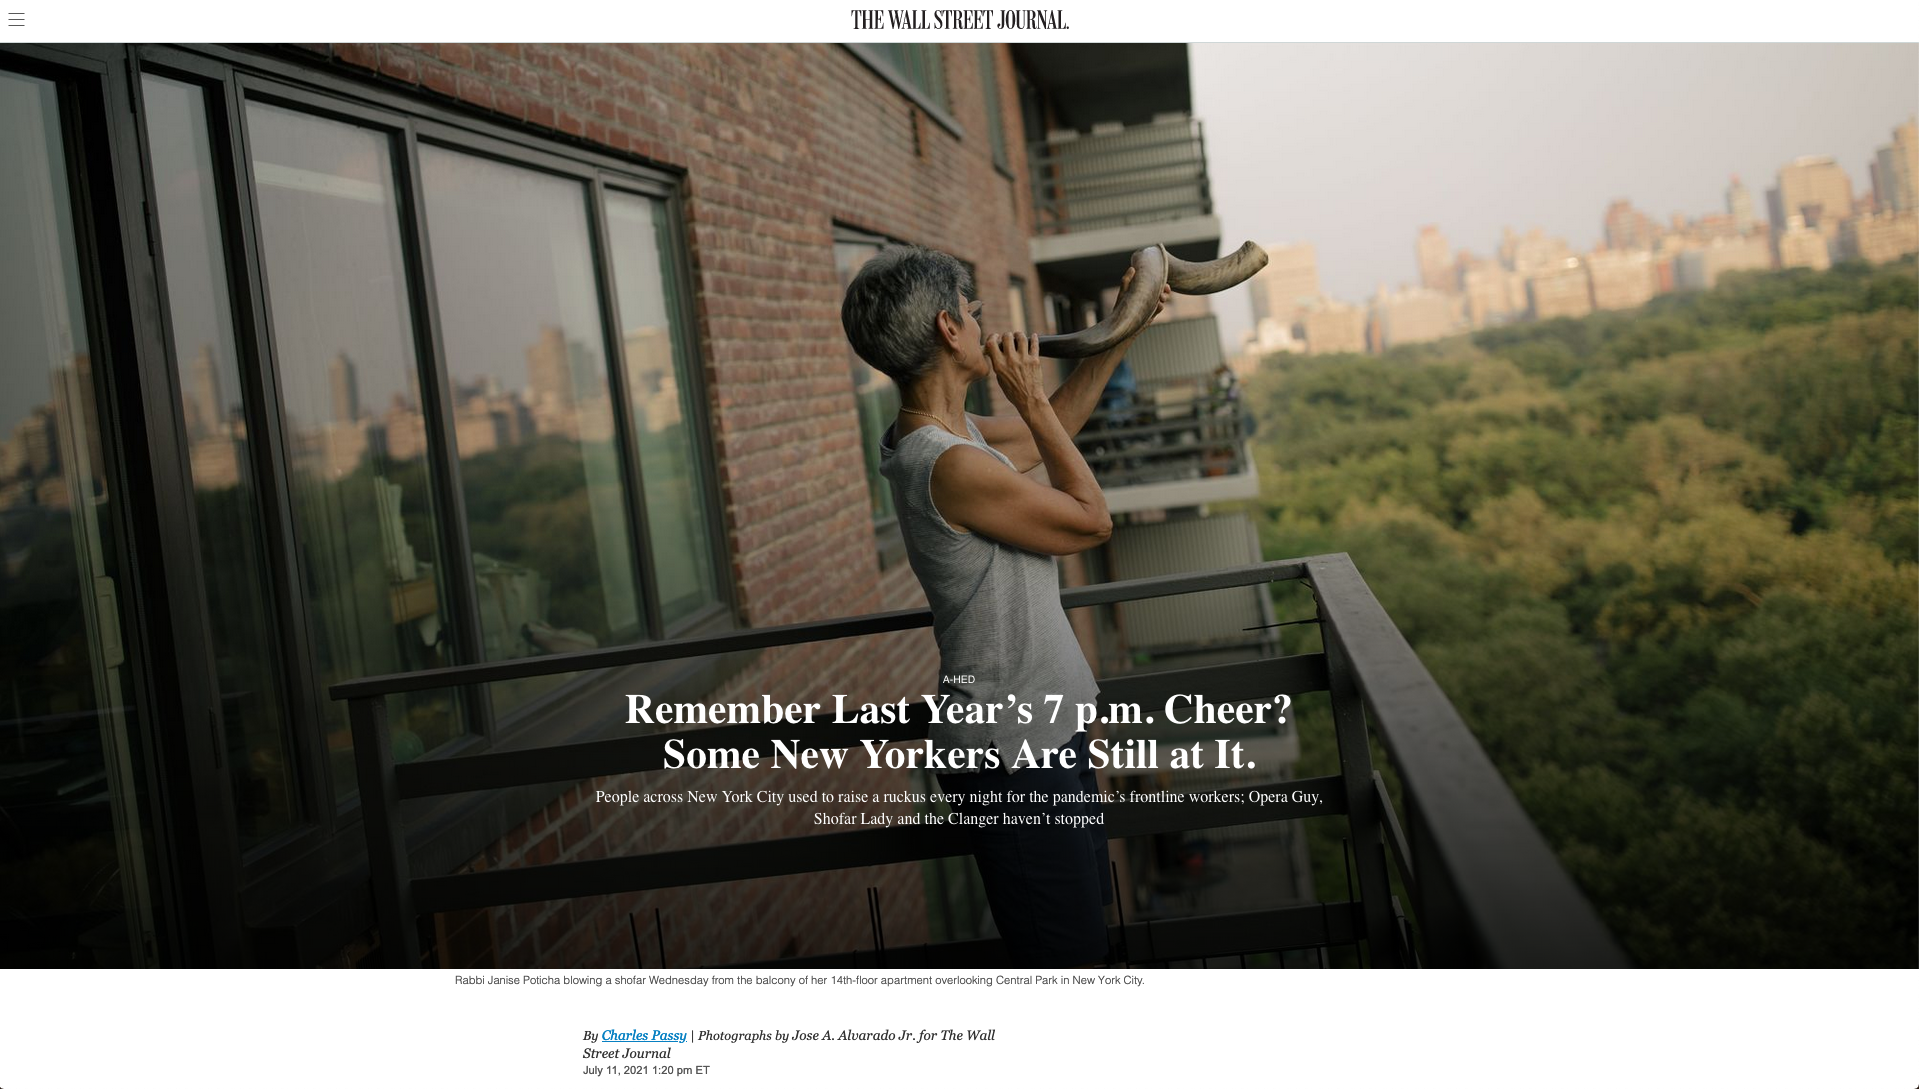 Thumbnail of for The Wall Street Journal: Remember Last Year's 7 p.m. Cheer? Some New Yorkers Are Still at It. 